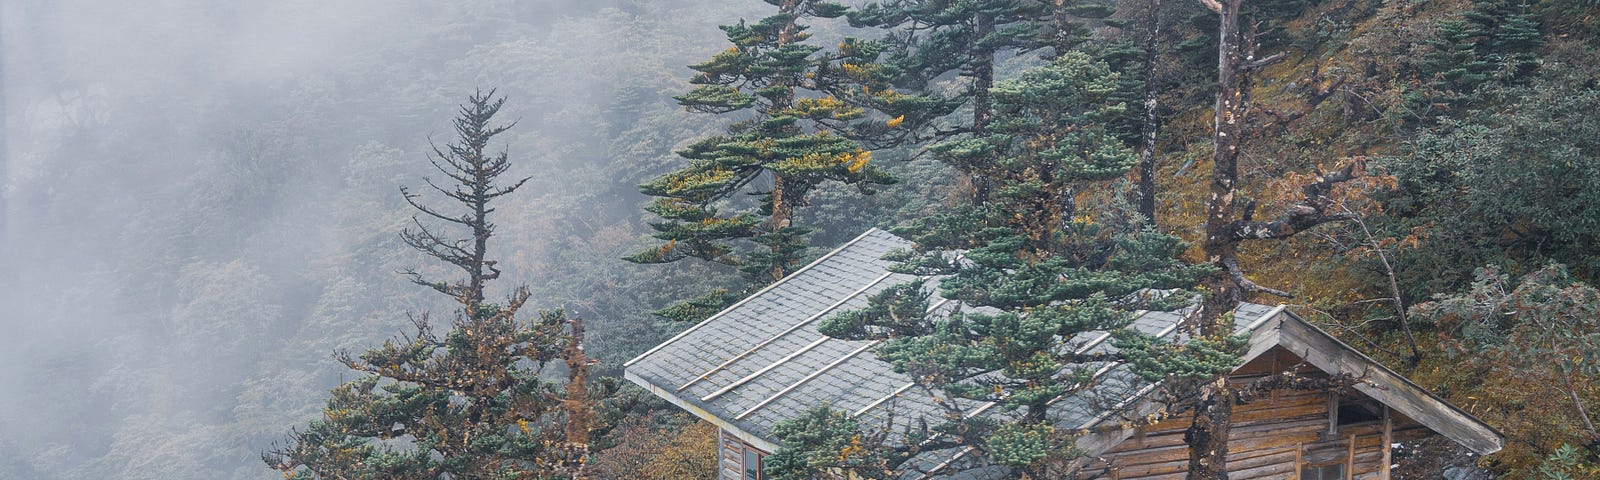 A house in forested mountains